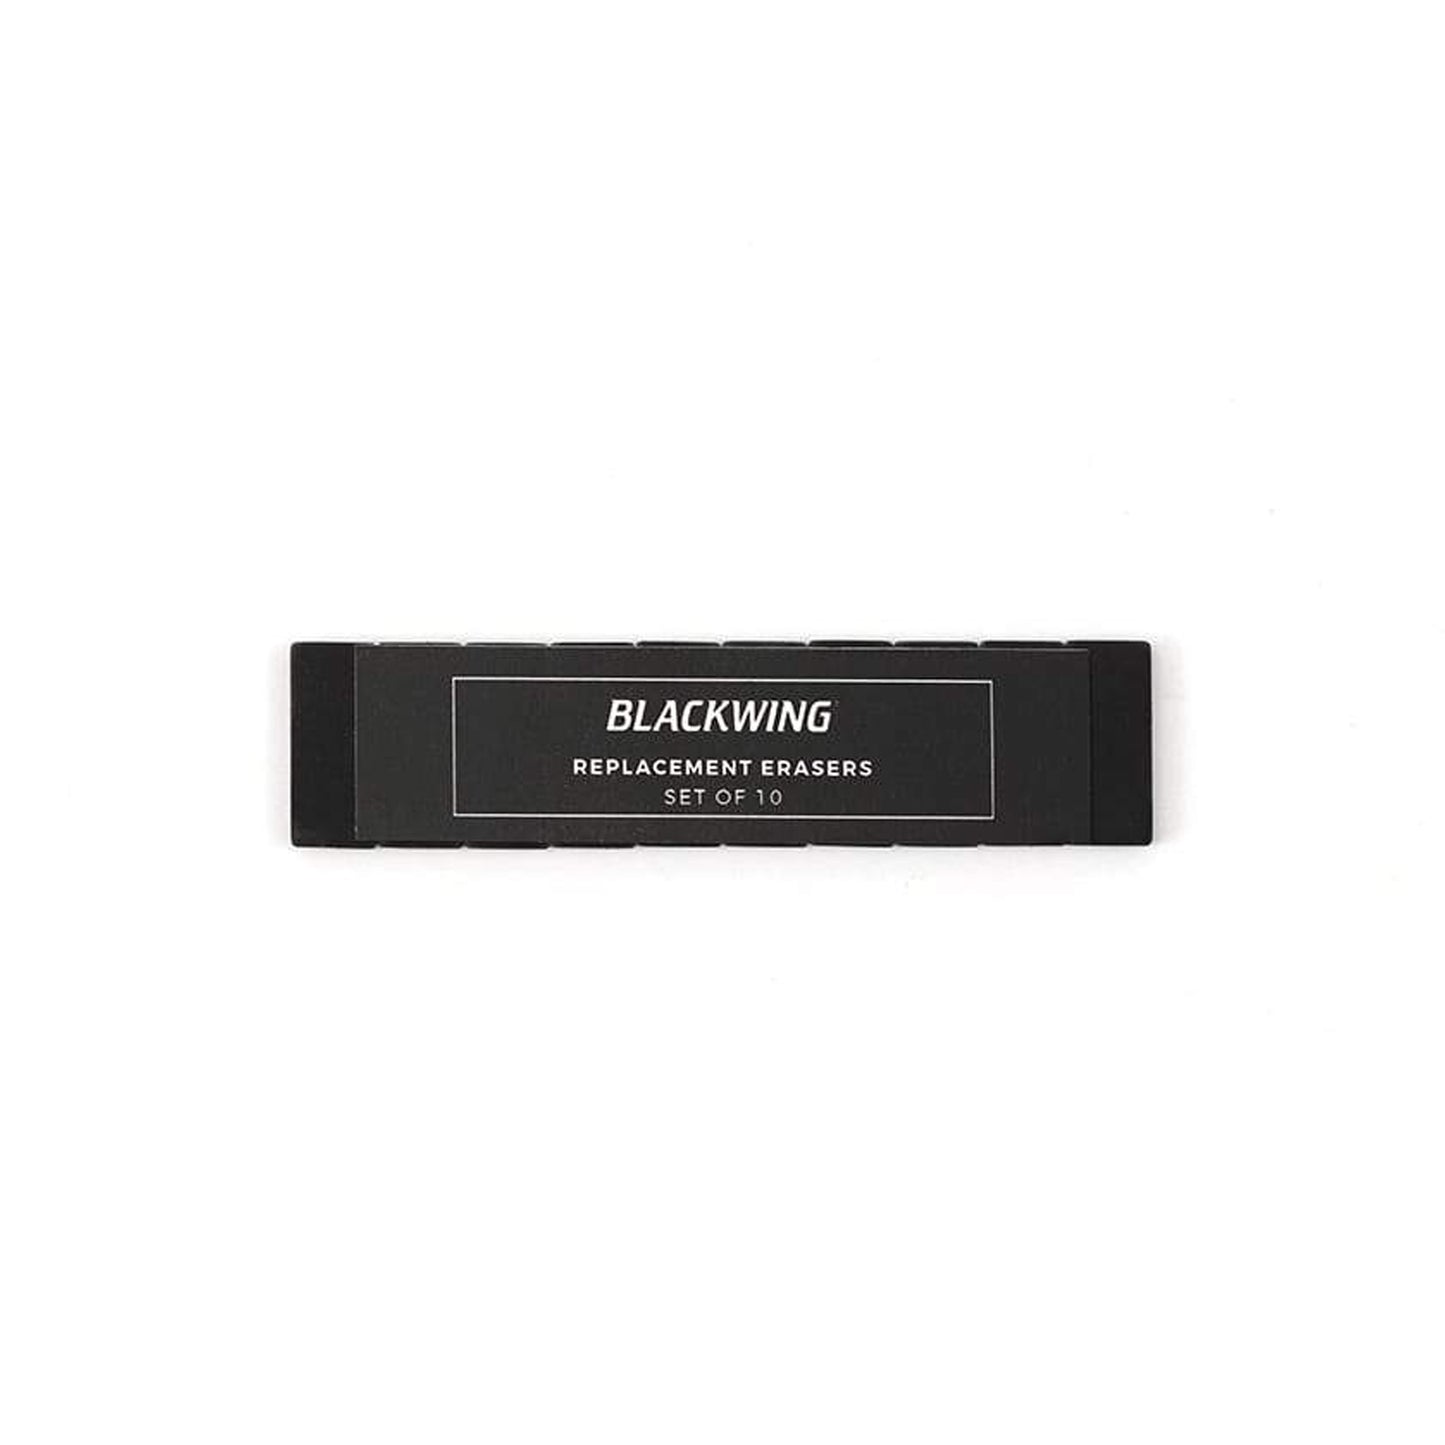 Blackwing Replacement Erasers - Black by Blackwing - K. A. Artist Shop